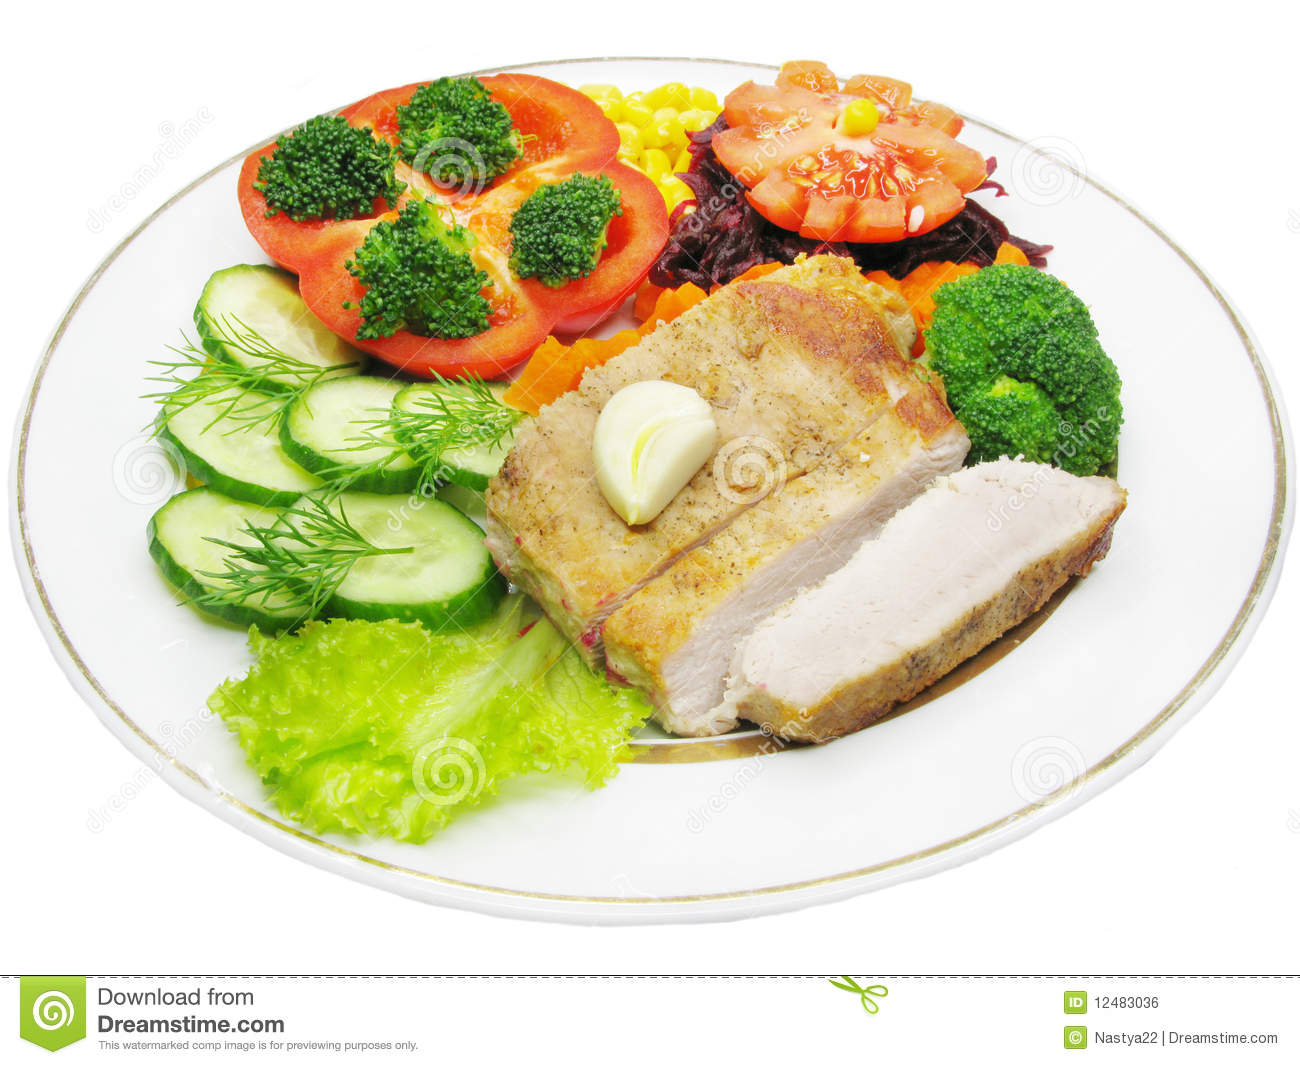 Cooked Meat With Vegetables Royalty Free Stock Image   Image  12483036